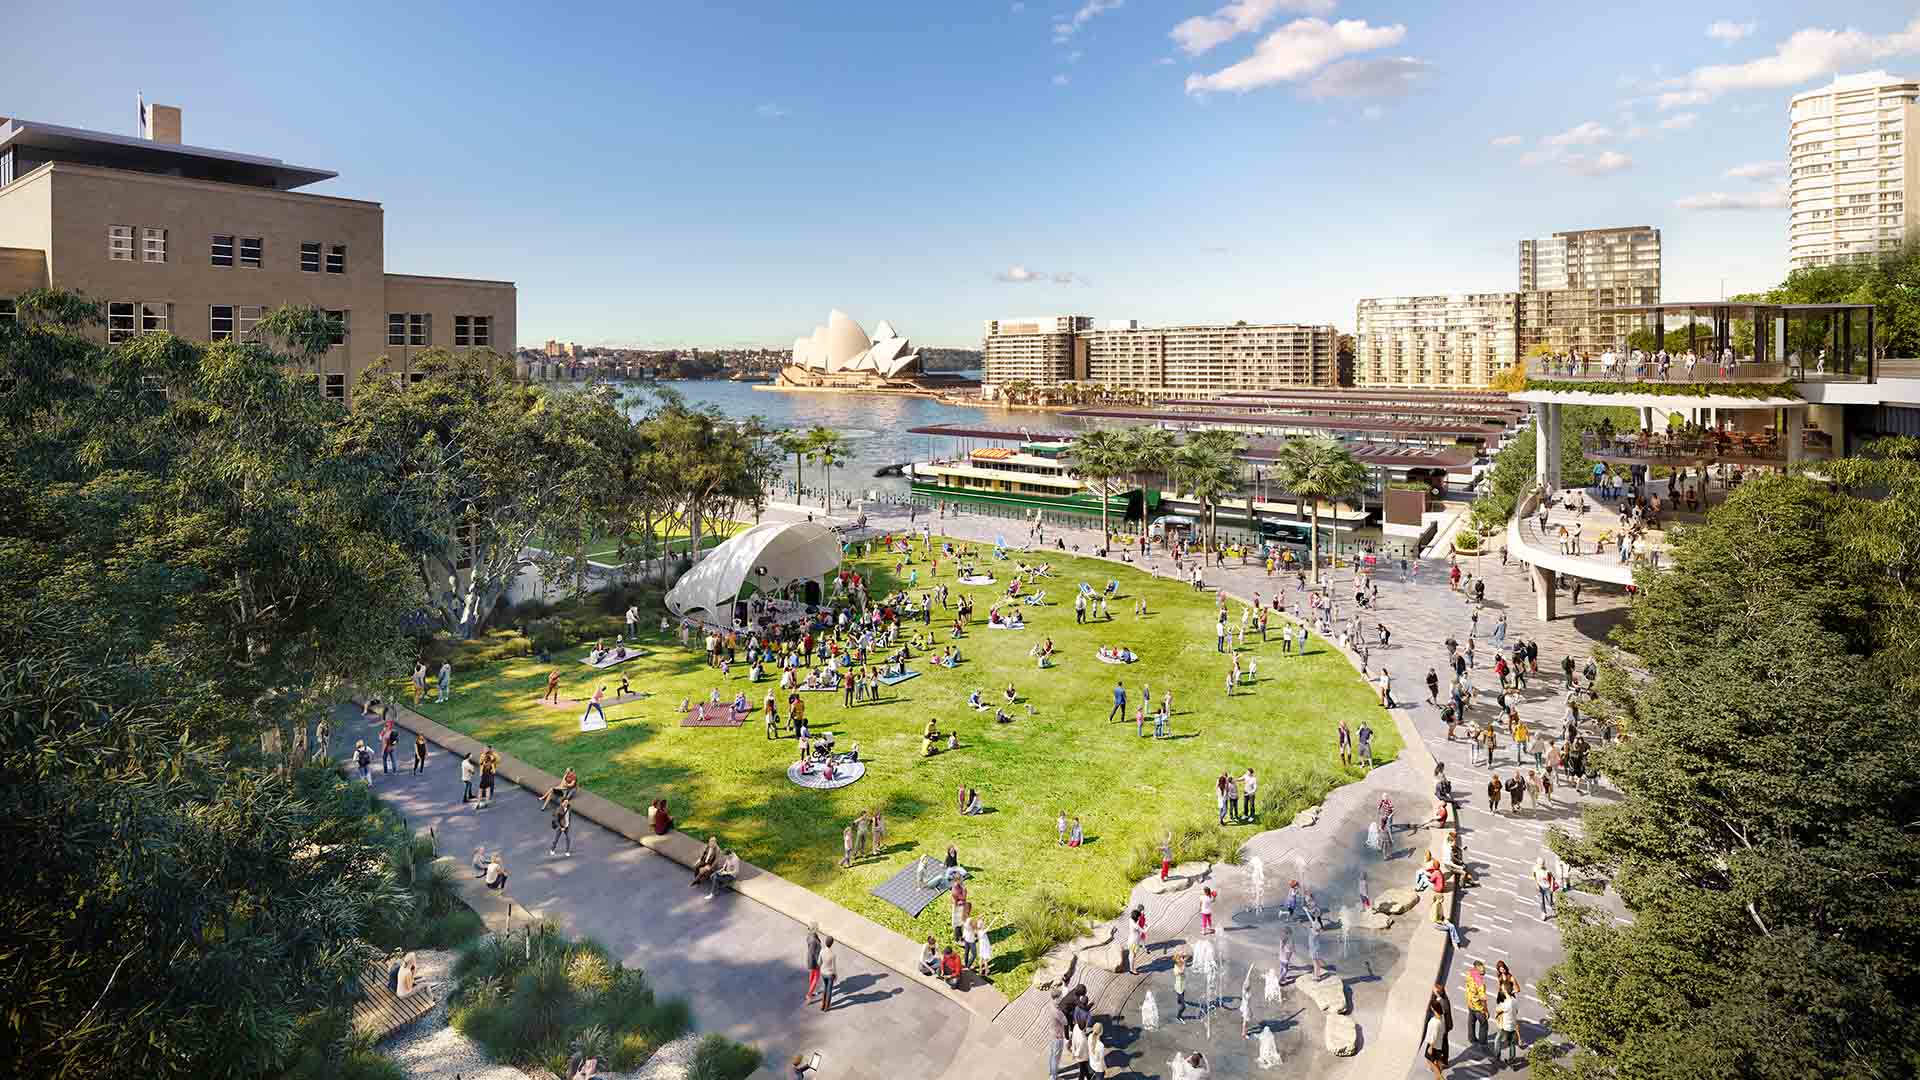 Sydney Might Get Its Own High Line-Style Park in a Huge Circular Quay and Cahill Expressway Revamp